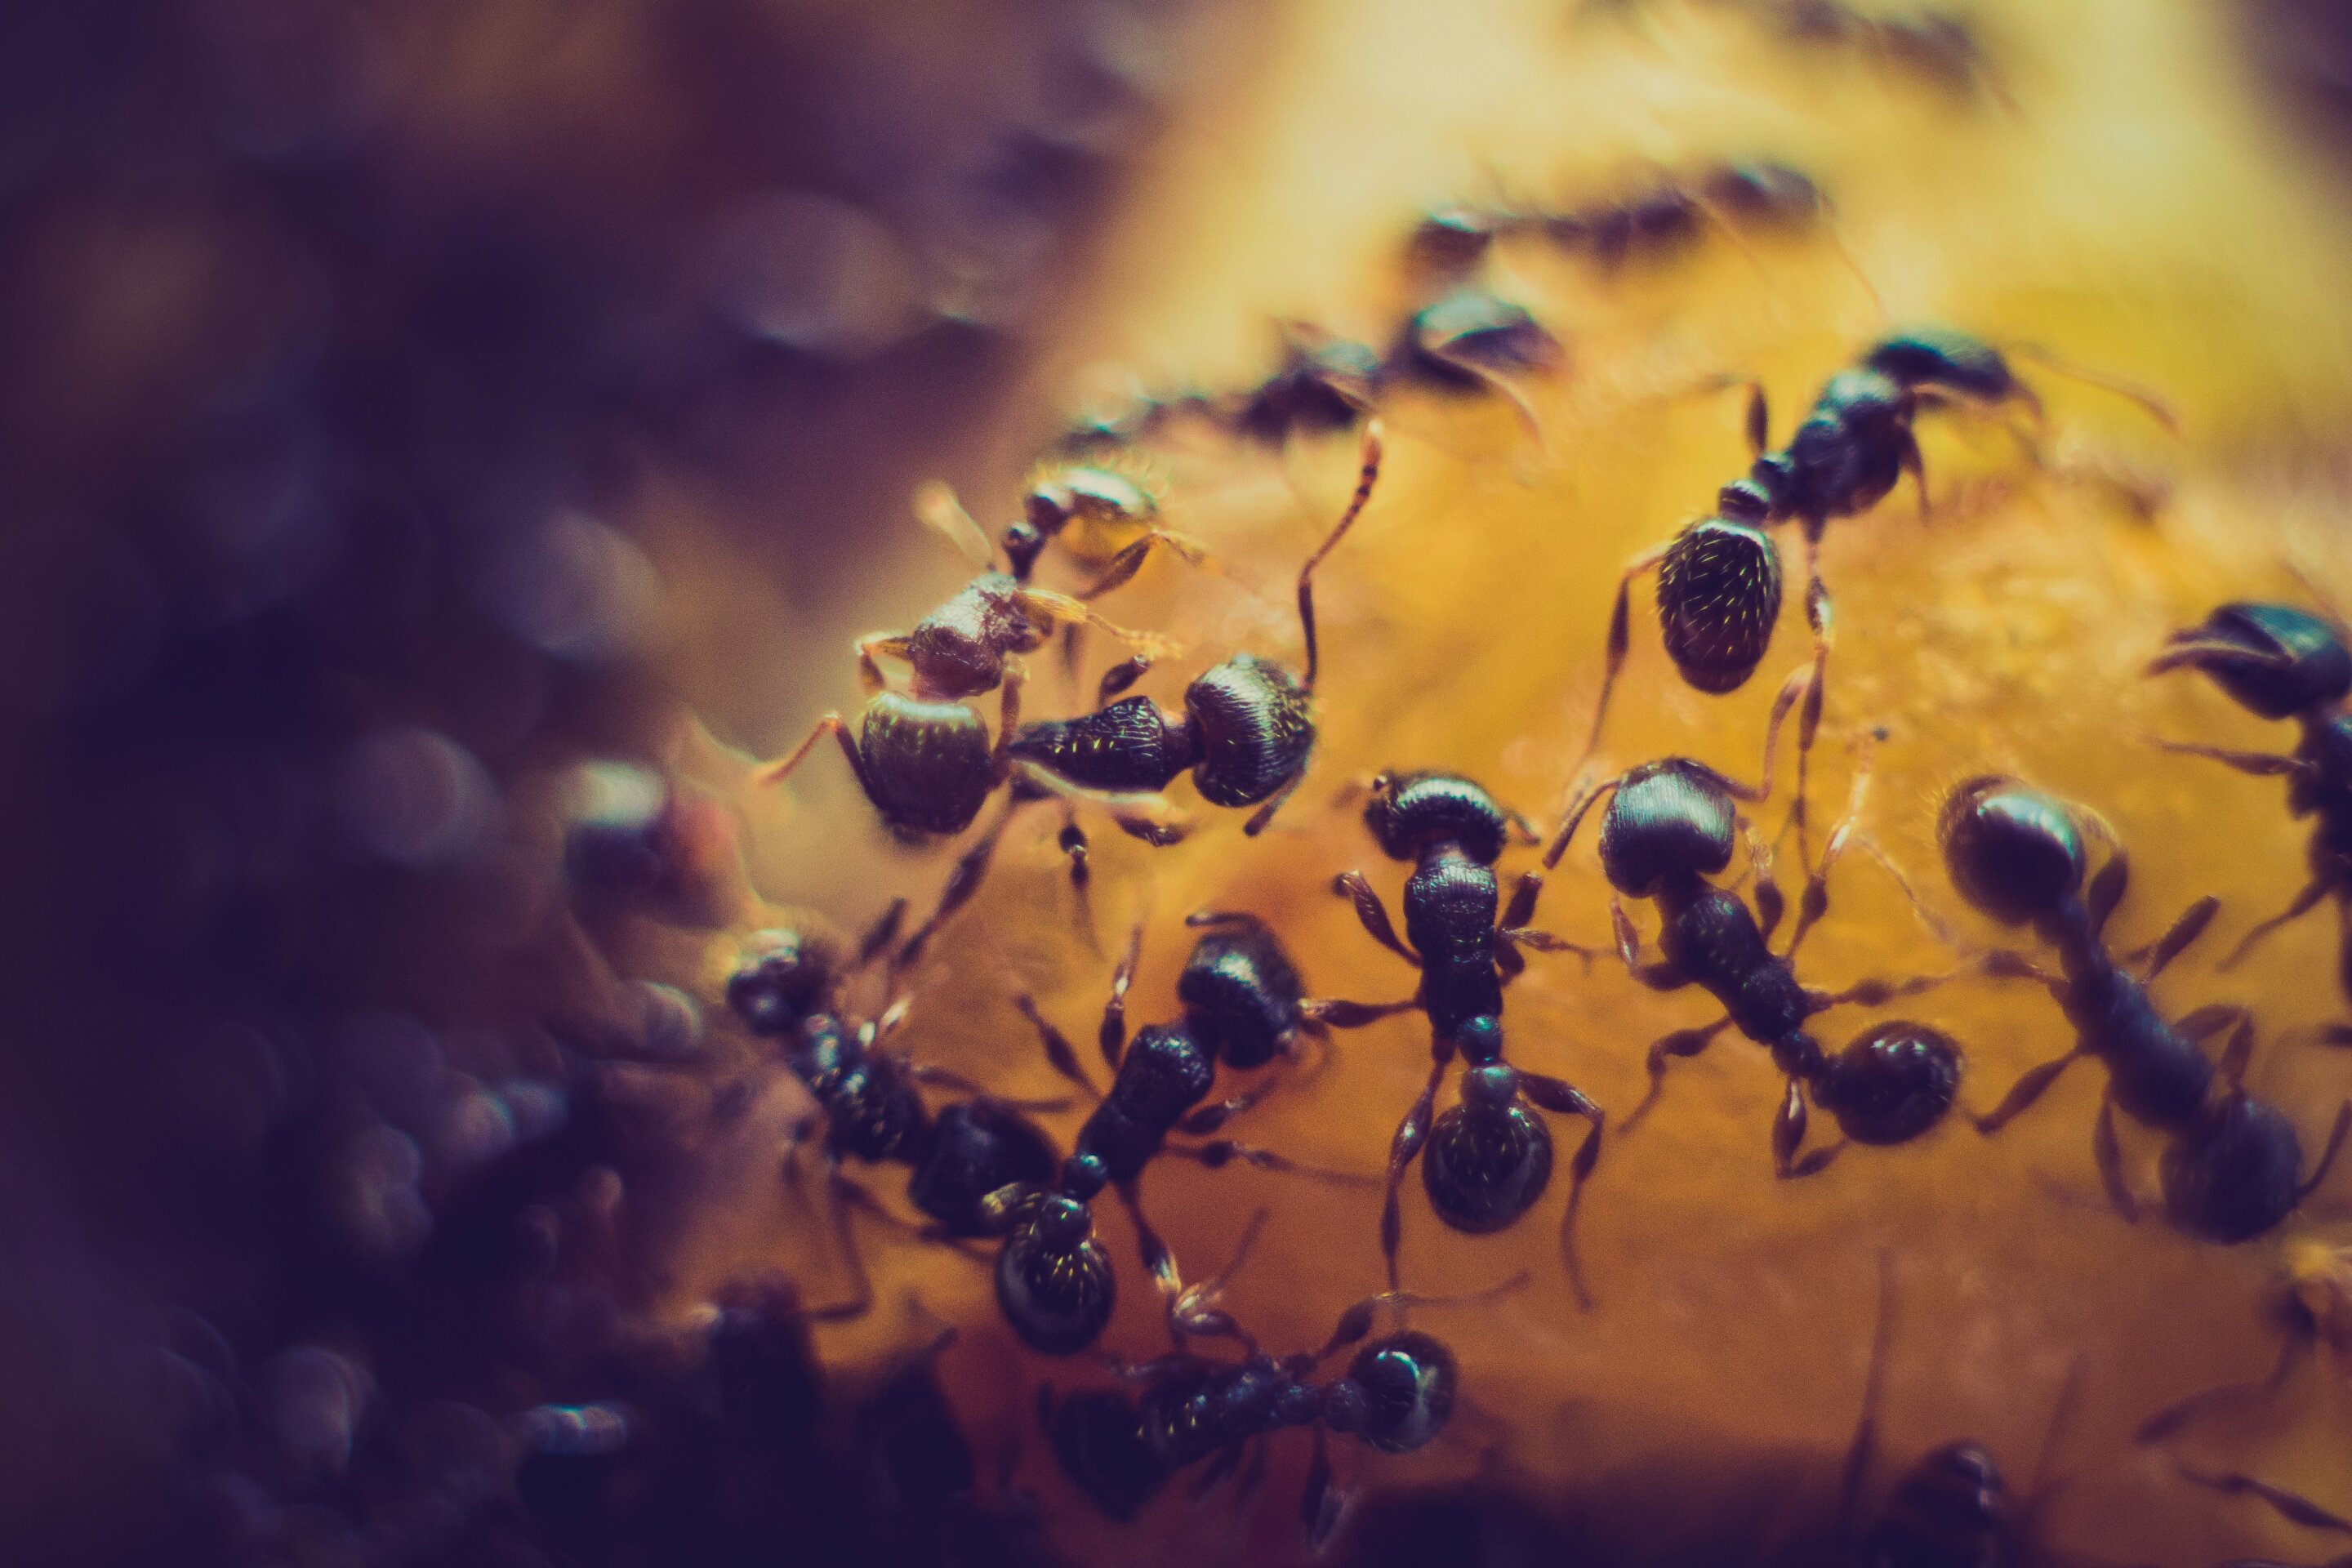 #Ants help reveal why sourcing different plants for eco fuels is crucial for biodiversity